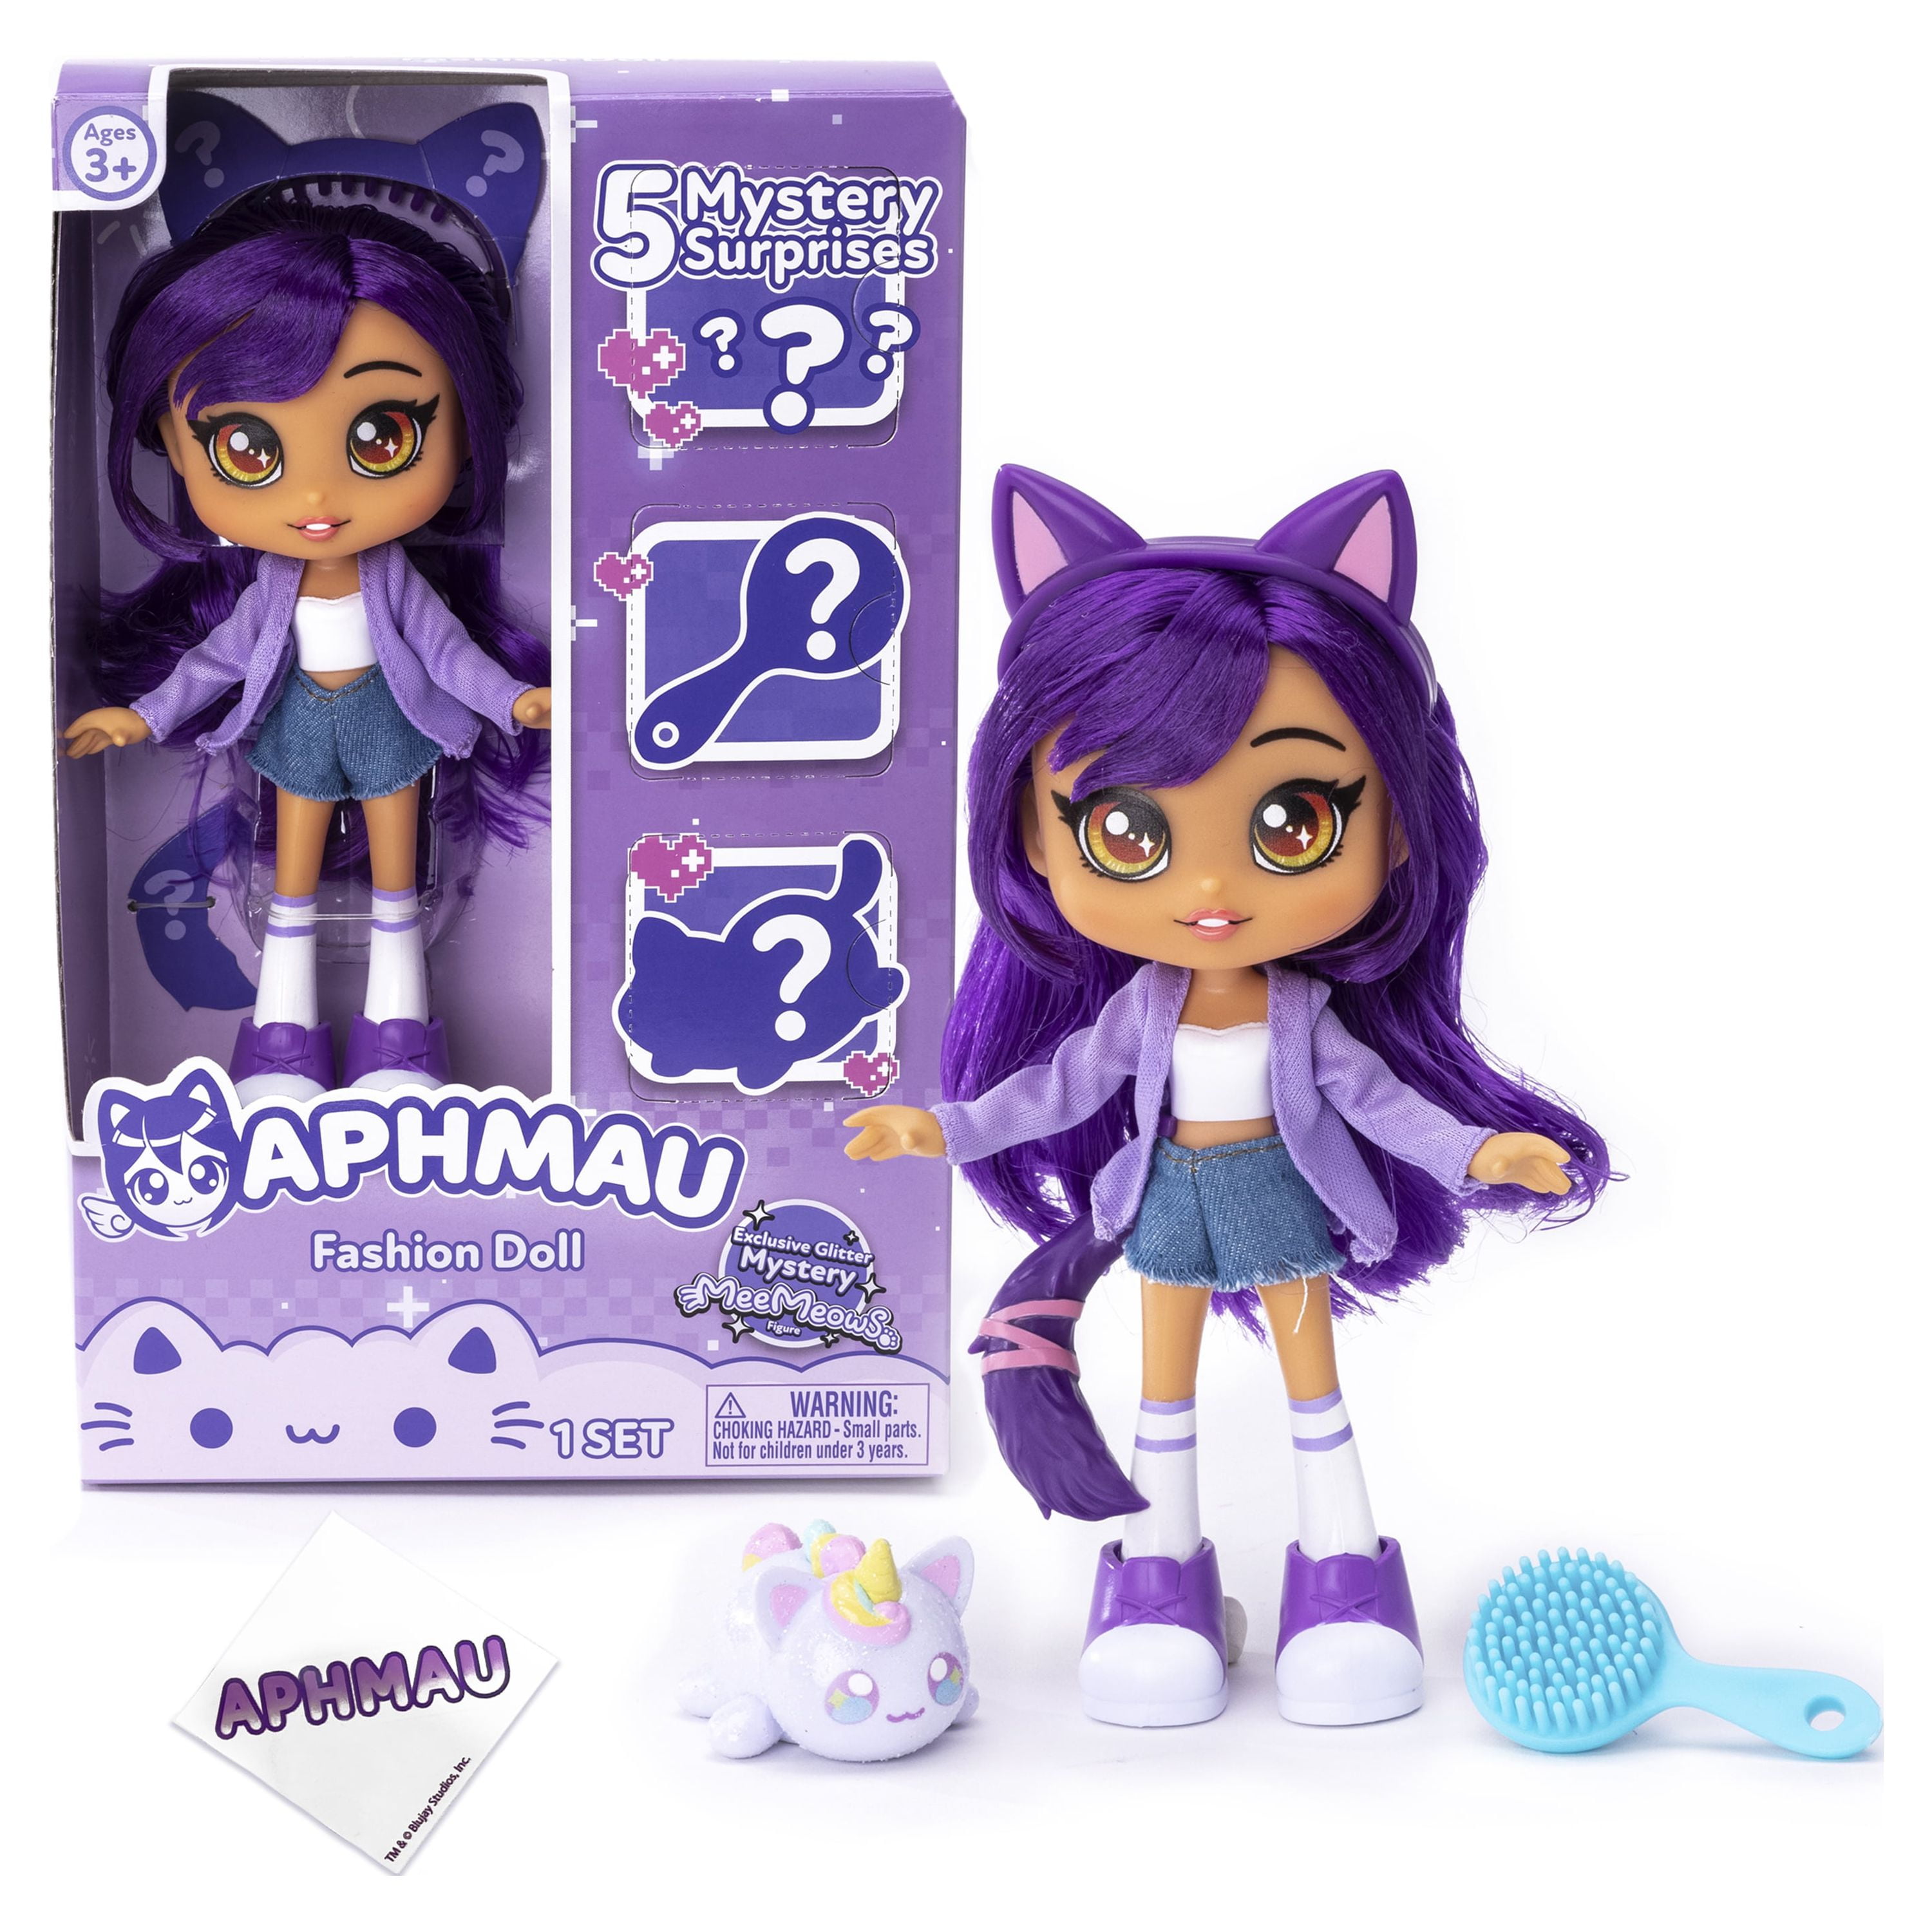 Aphmau Mystery Surprise Fashion Doll Unboxing #aphmauminecraft